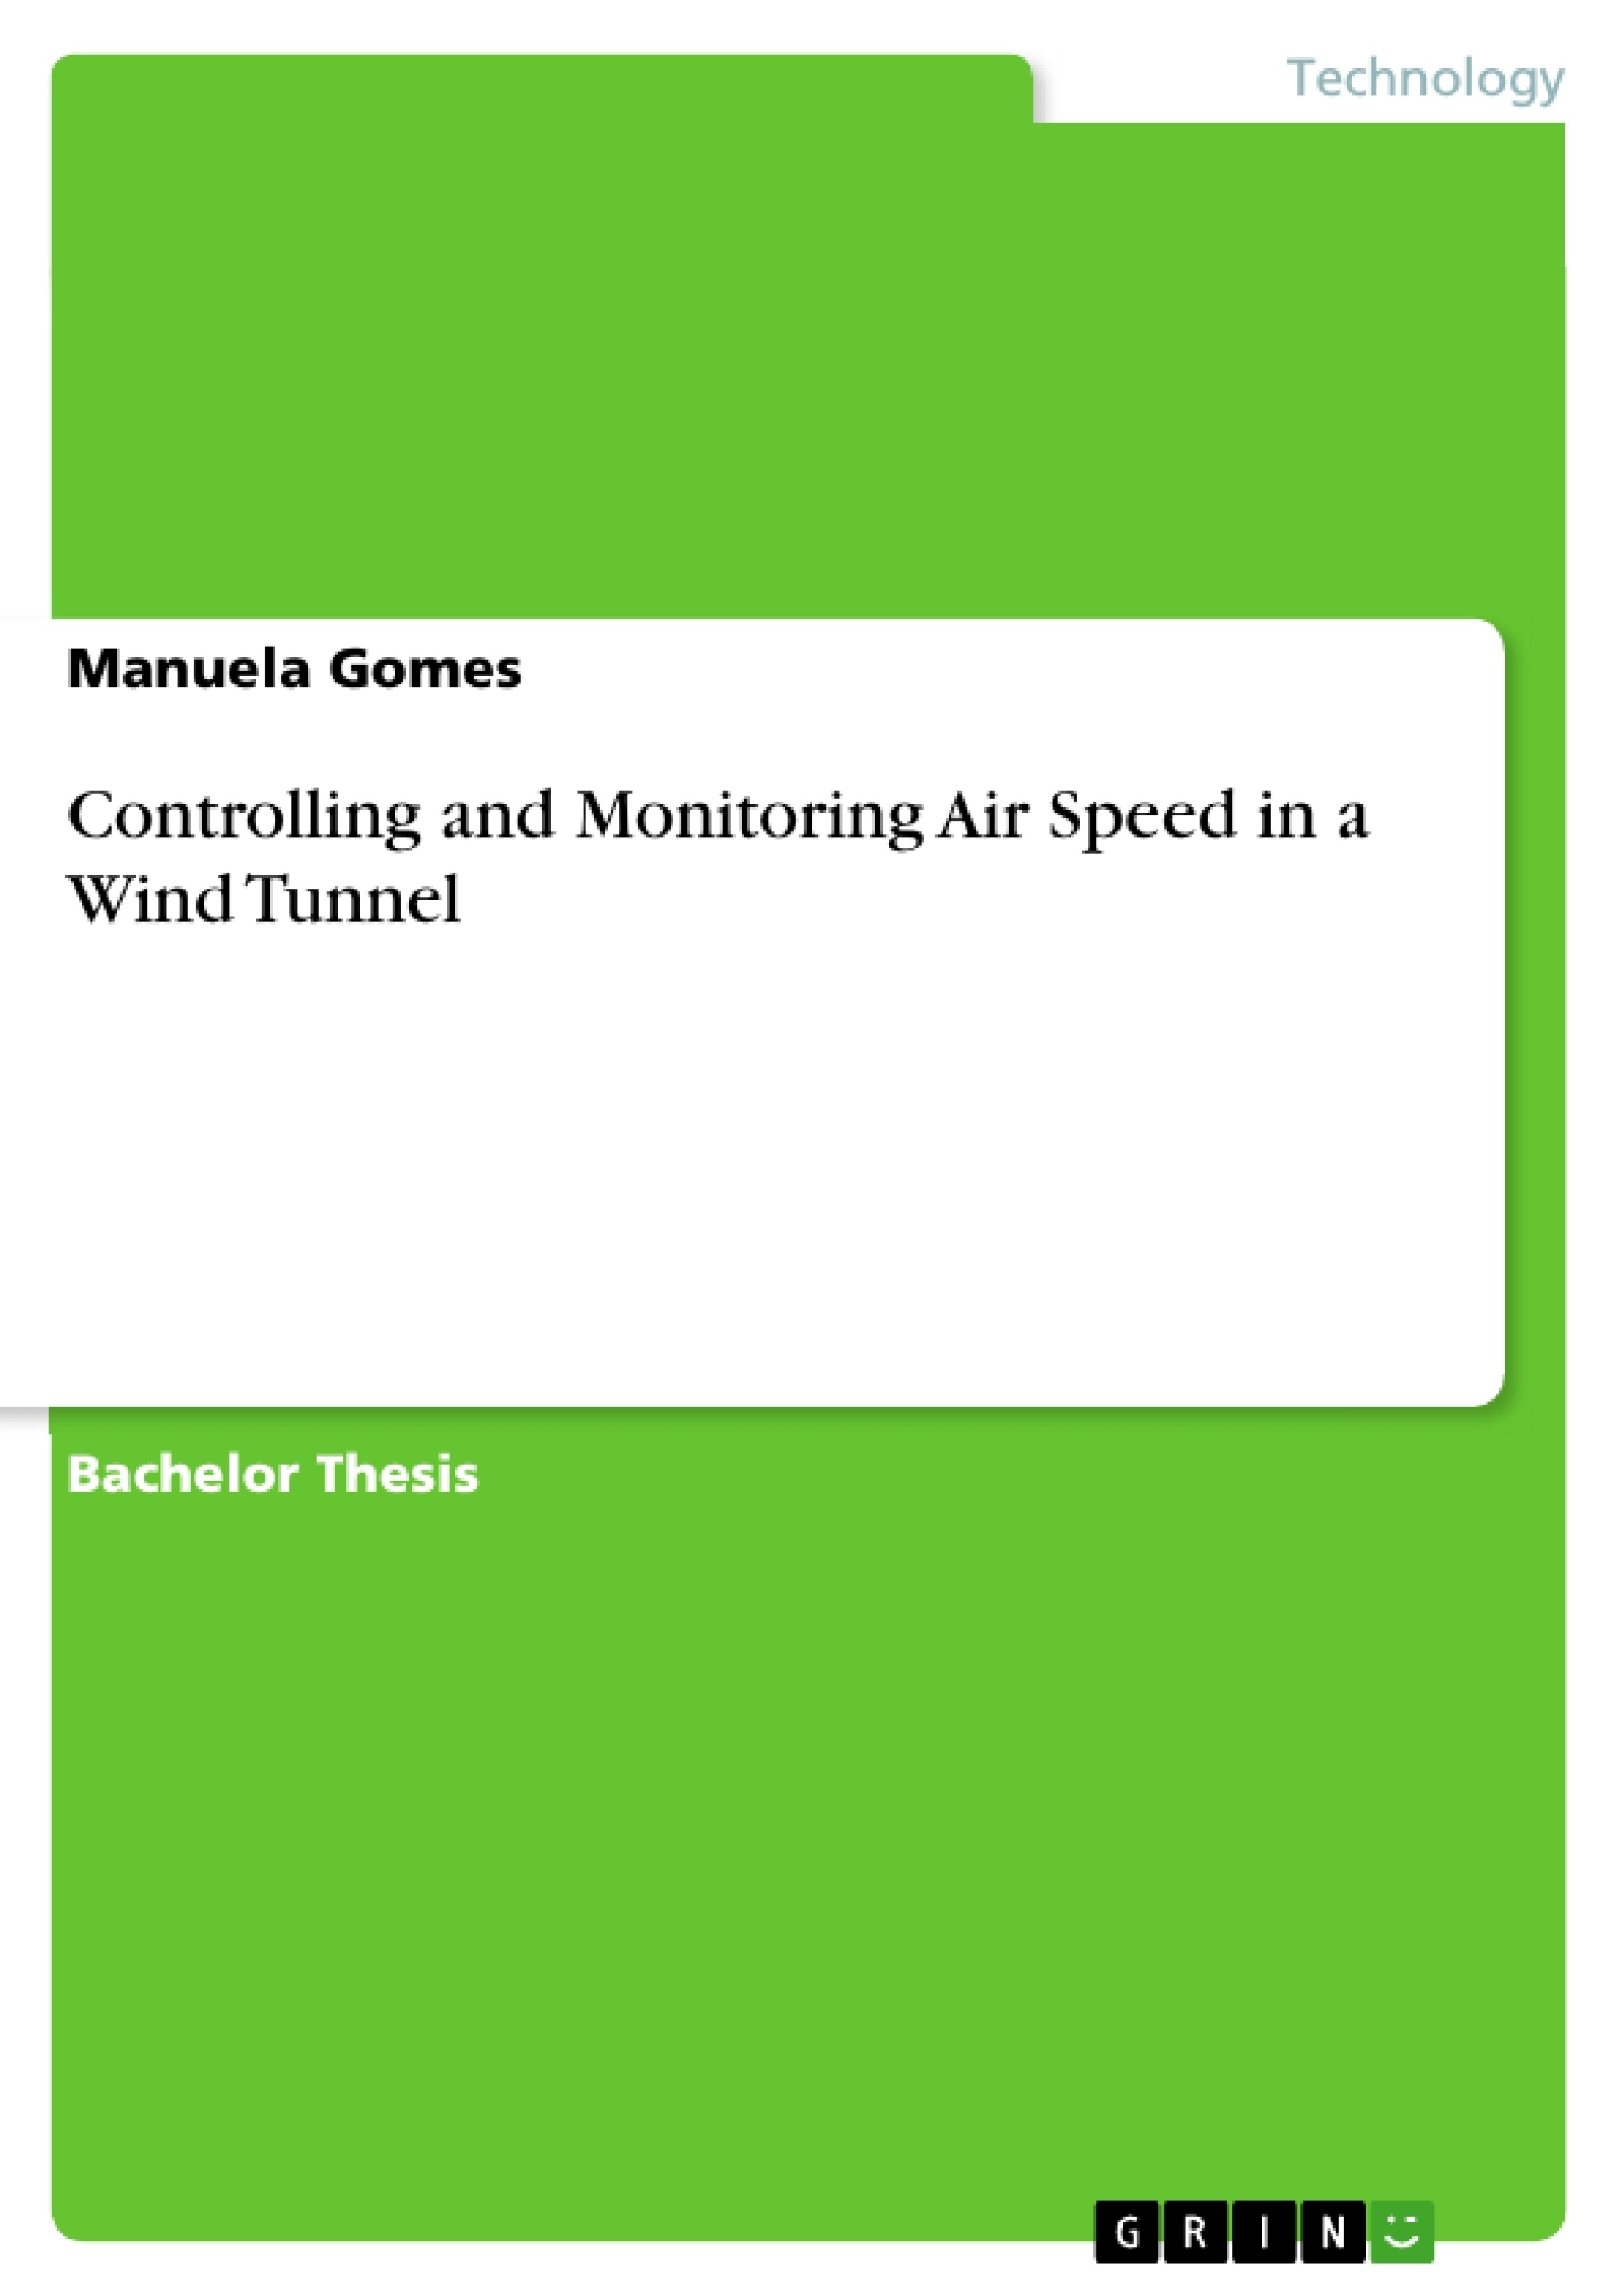 Título: Controlling and Monitoring Air Speed in a Wind Tunnel